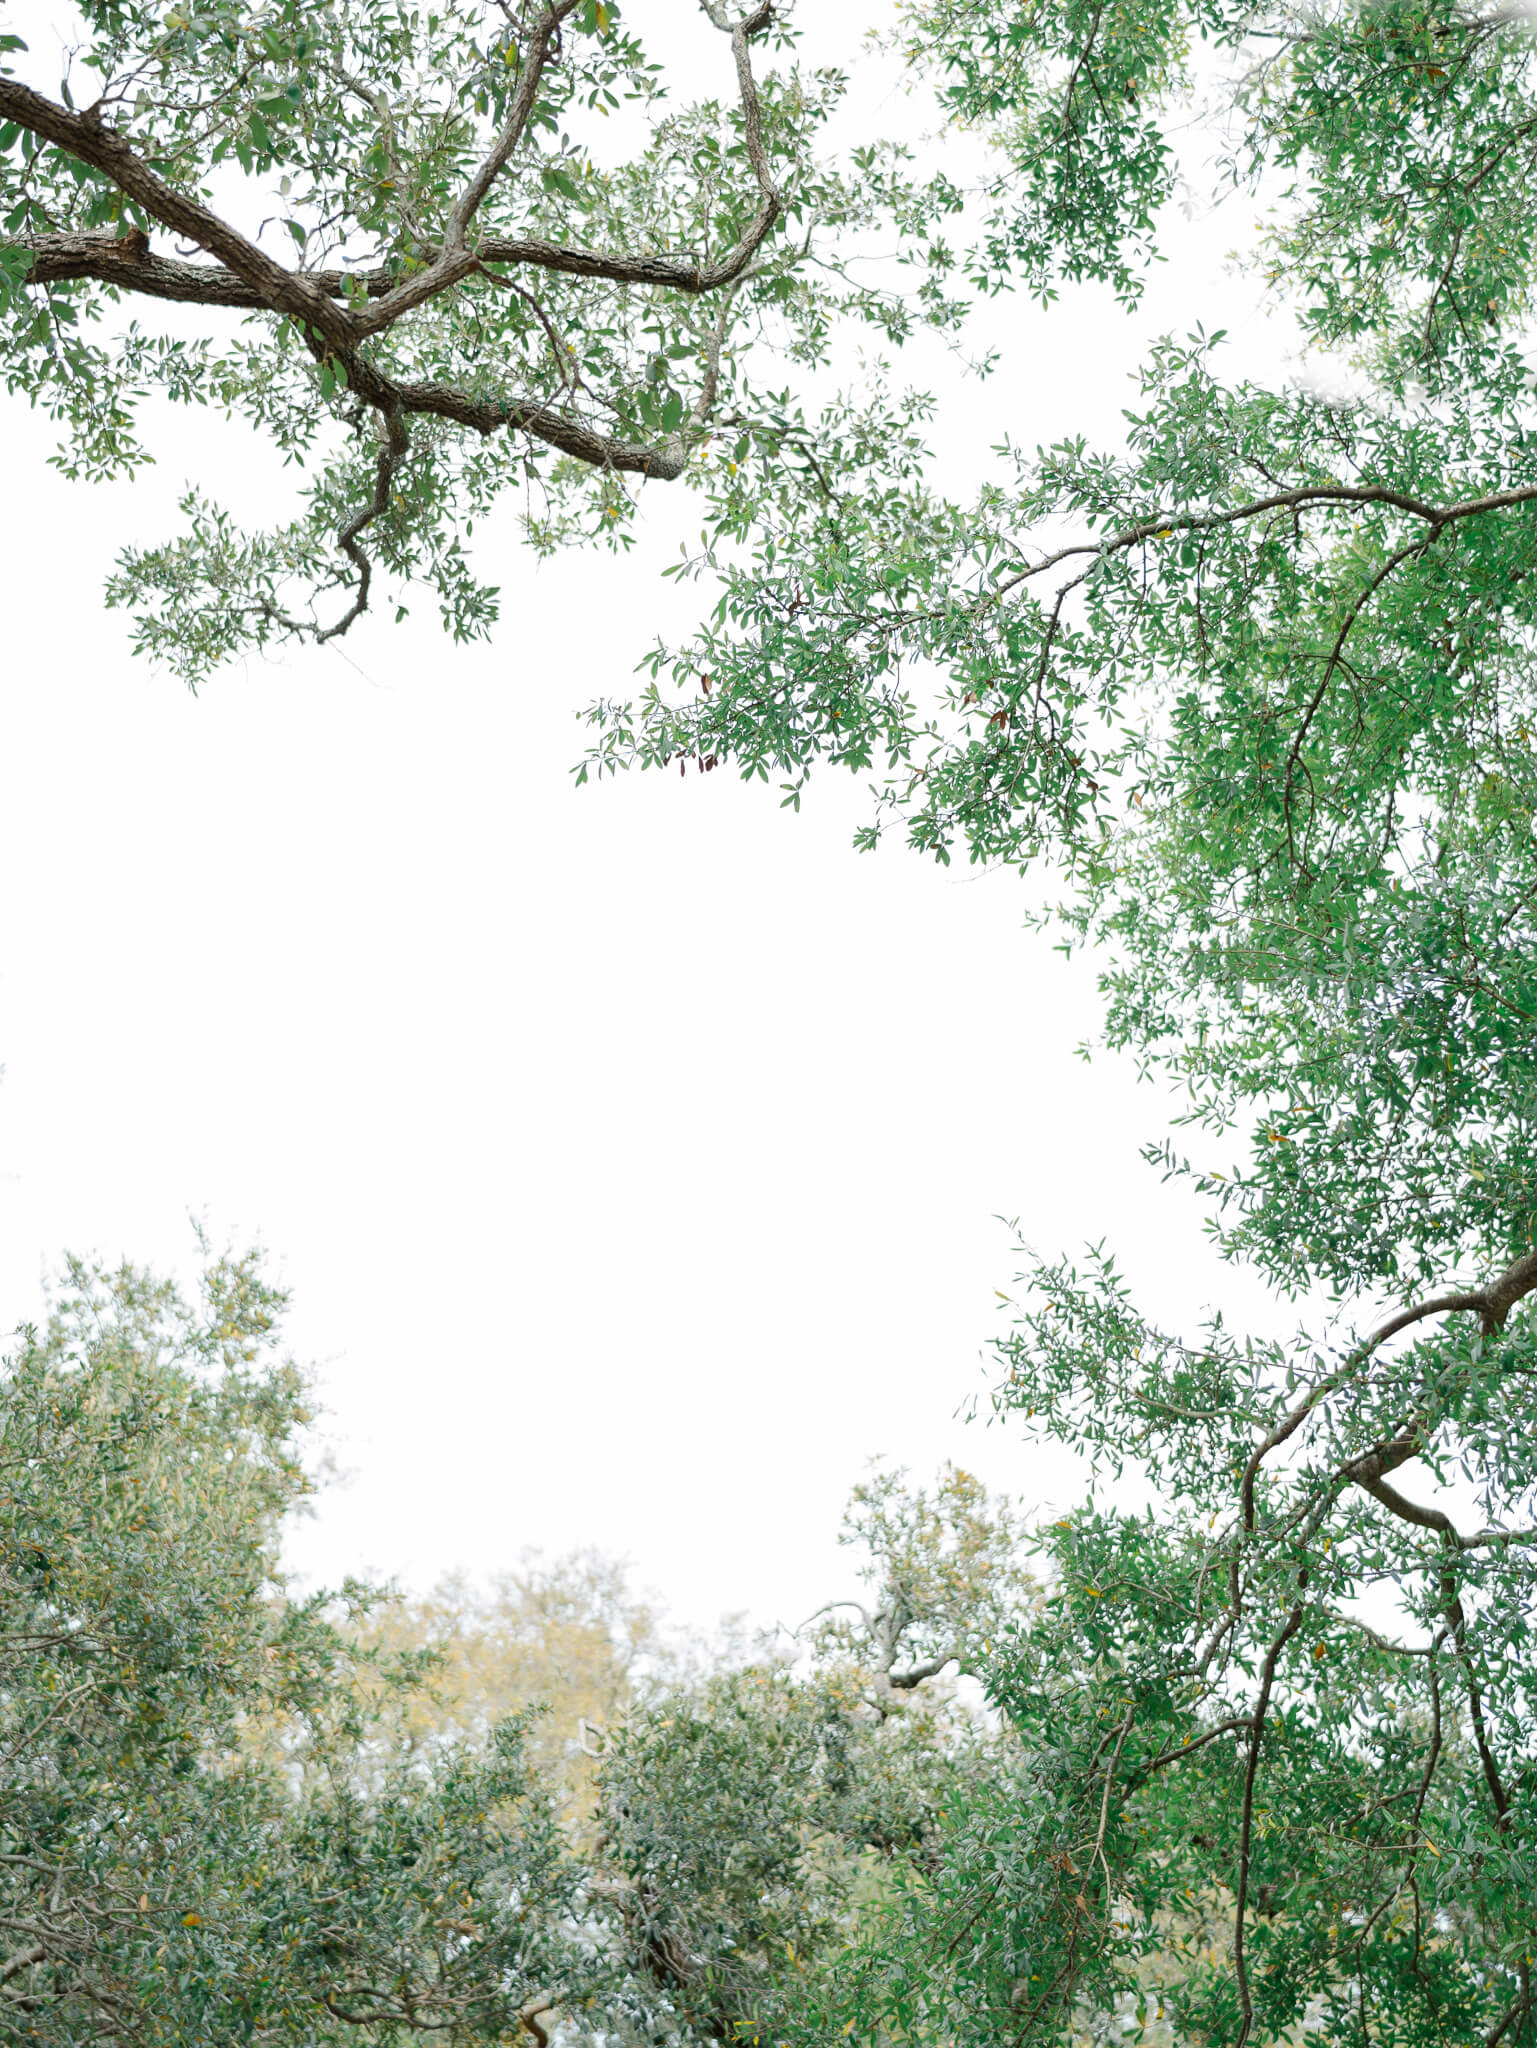 Live oak canopy shot from the ground up towards the sky at Lowndes Grove wedding venue.